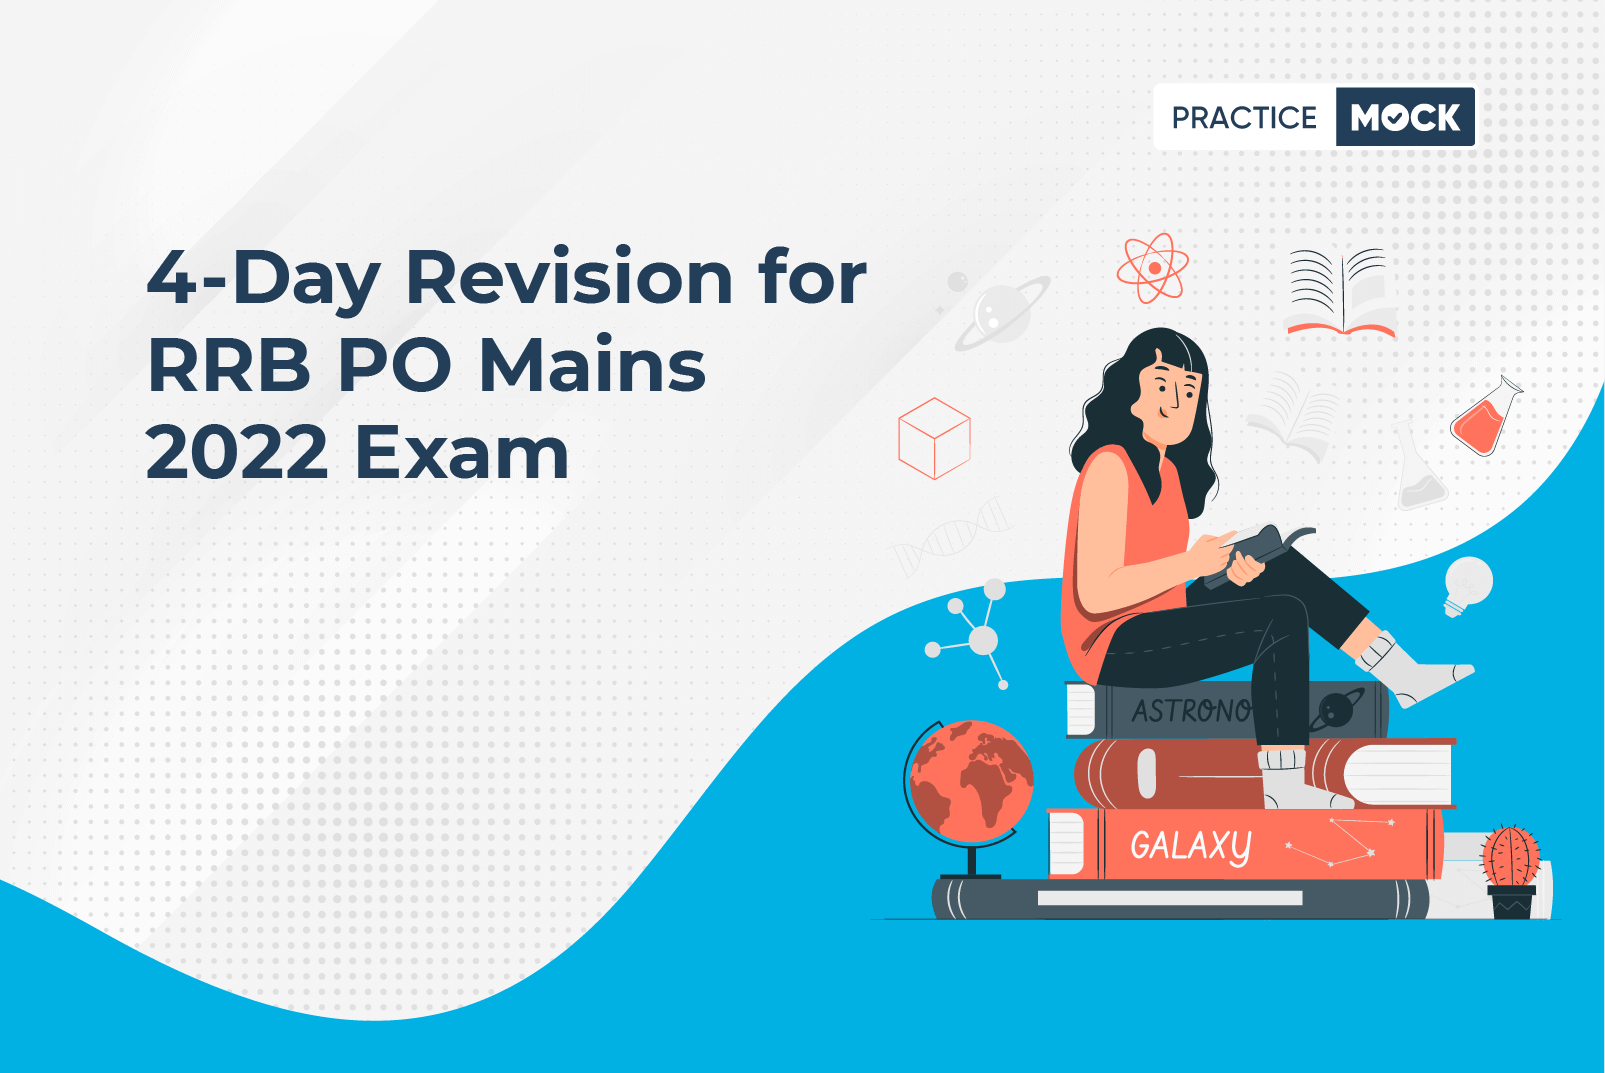 4-Day Revision for RRB PO Mains 2022 Exam